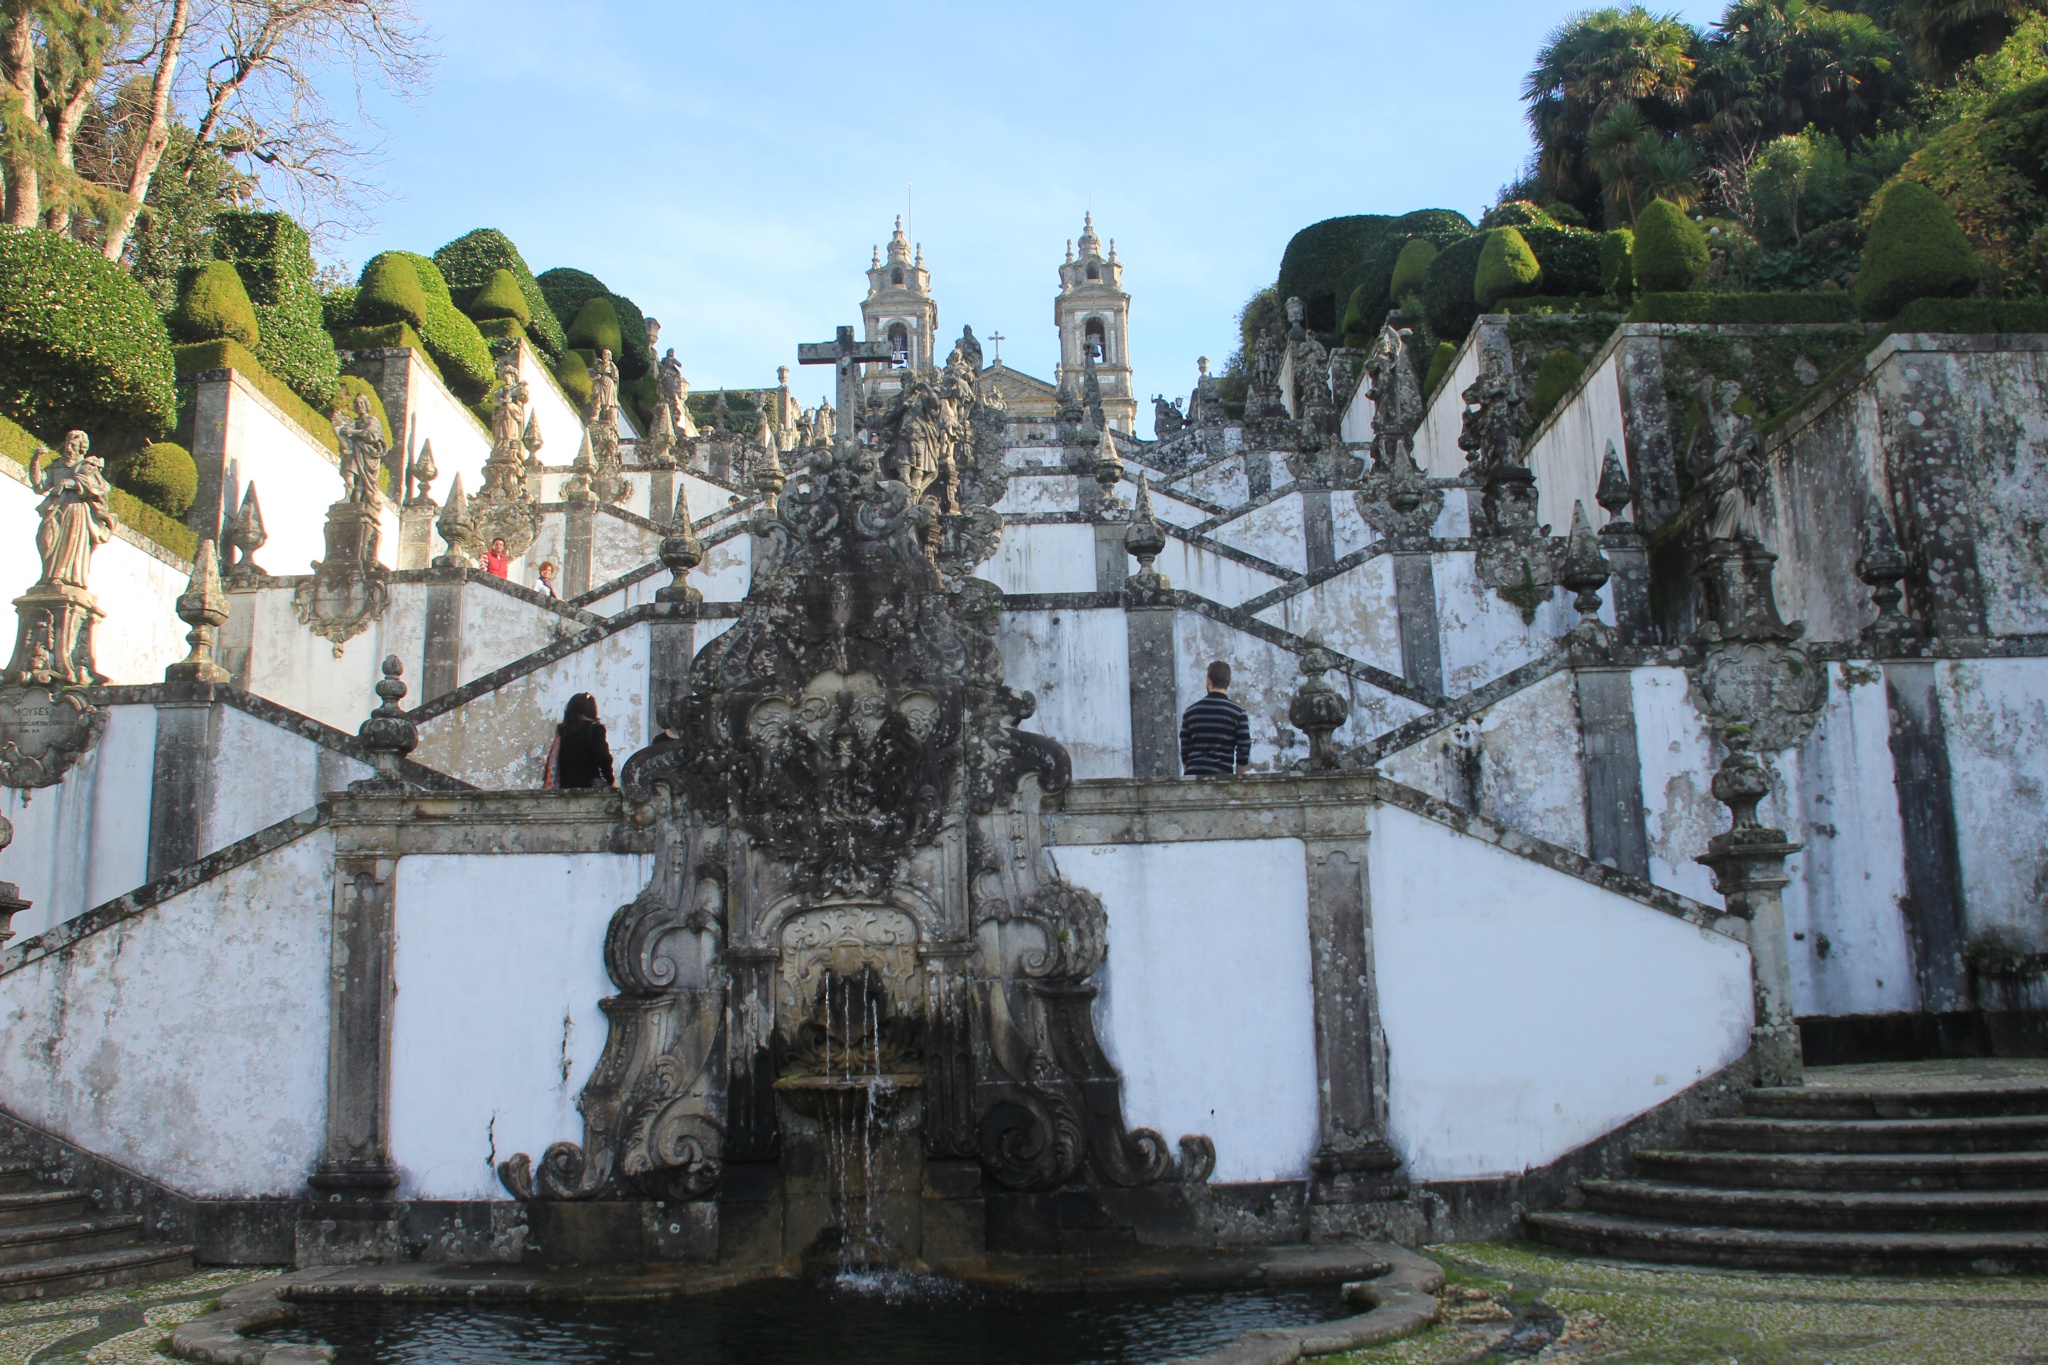 A beautiful, Baroque staircase can be climbed by visitors to the Bom Jesus do Monte church in Braga, Portugal.